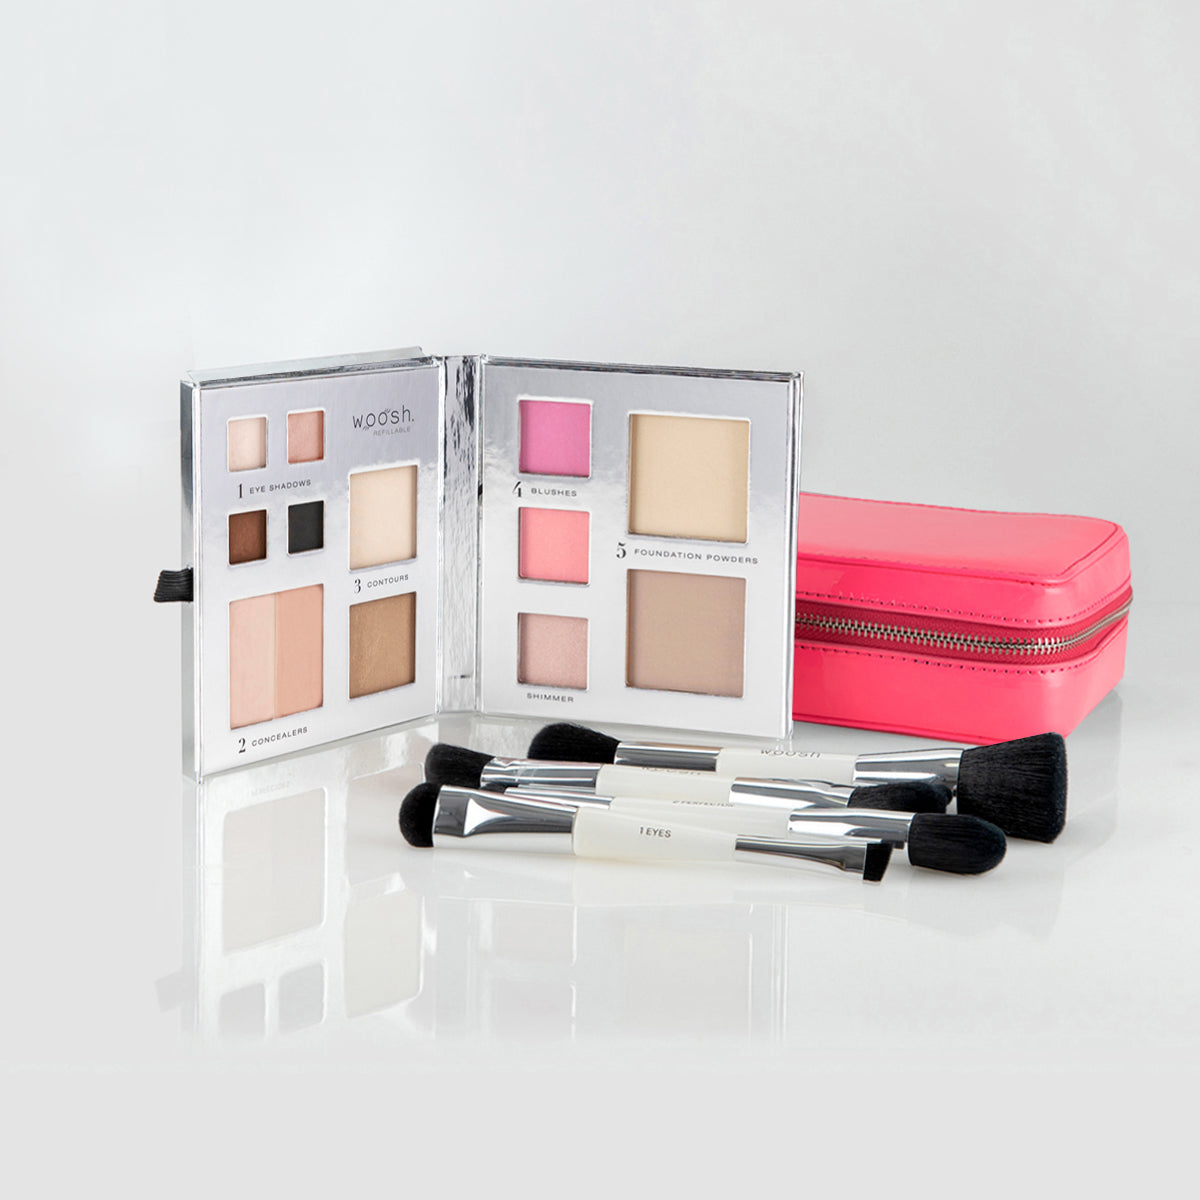 Fold Out Face 13 pan palette, pink case, and essential brush set with 4 dual-ended brushes